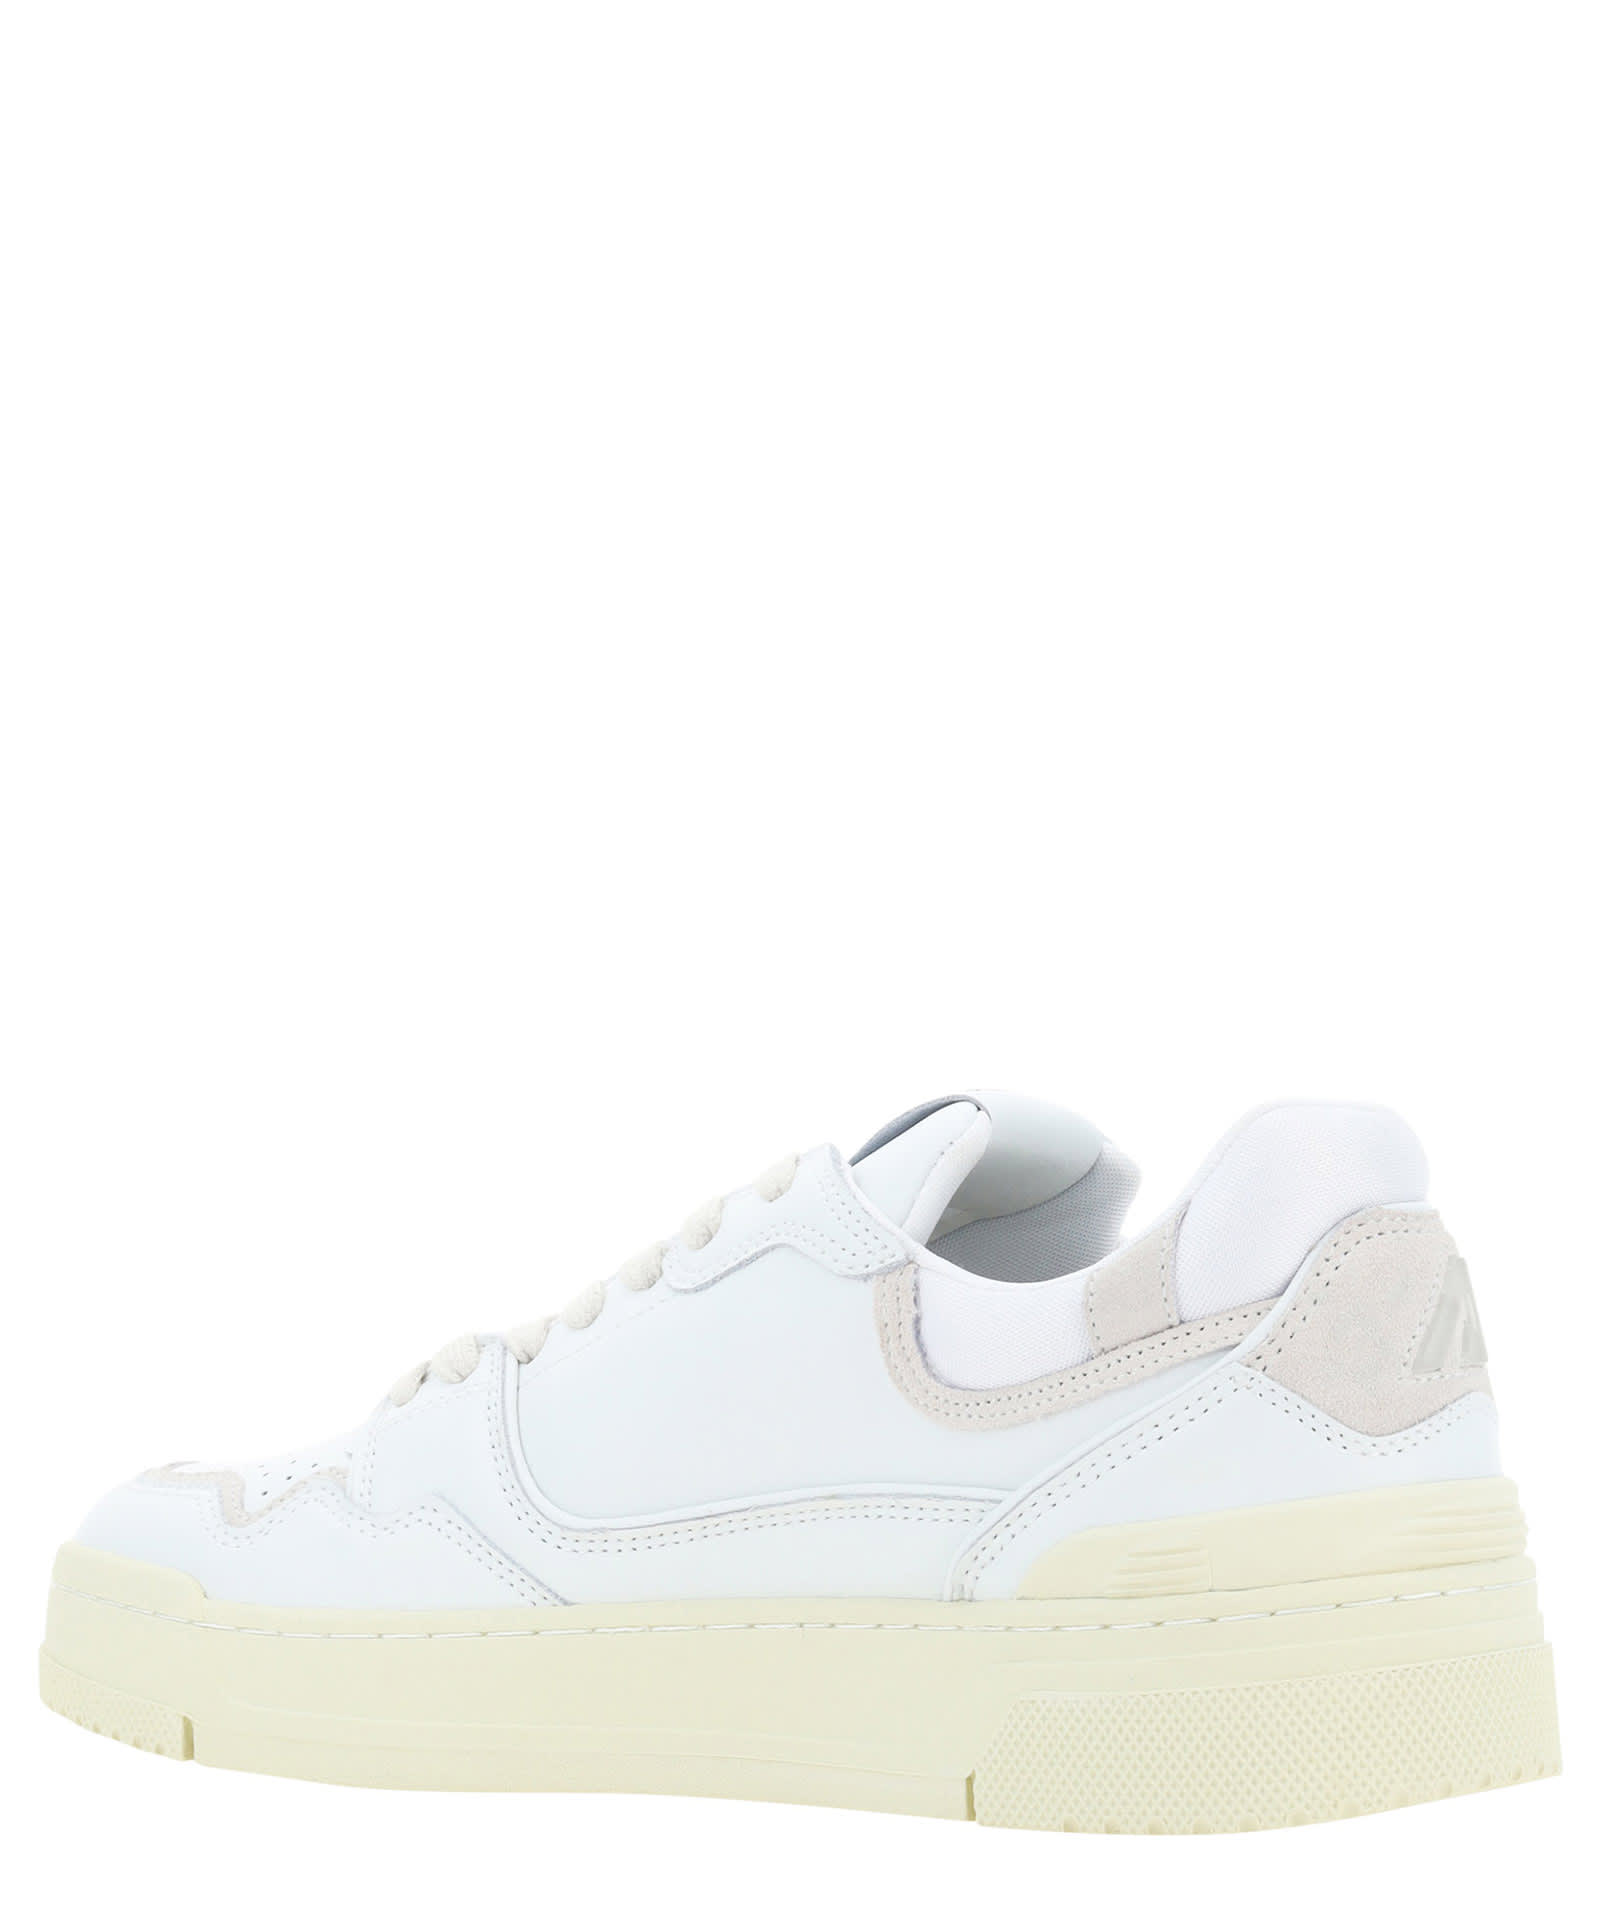 Shop Autry Clc Low Leather Sneakers In Mult/mat Wht